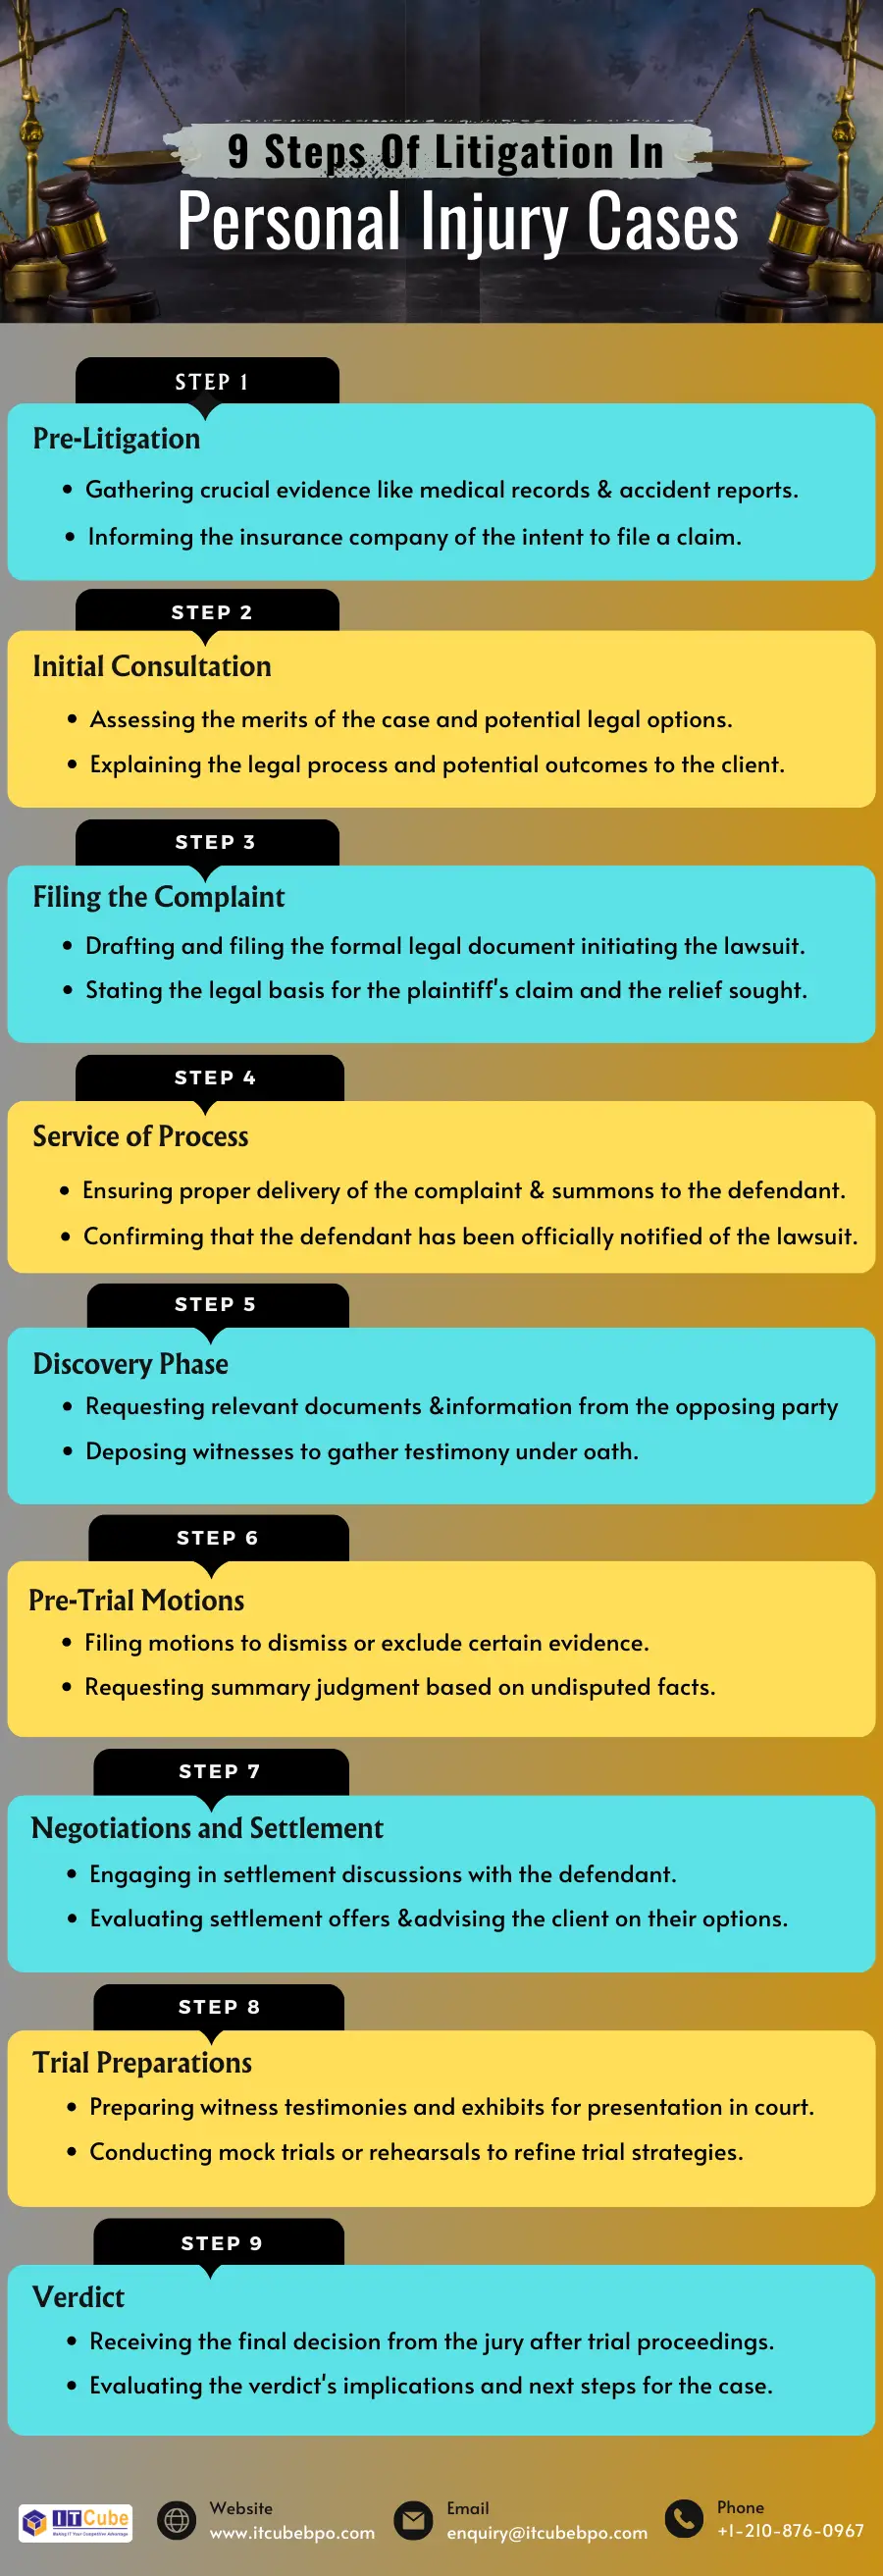 9-steps-of-litigation-in-personal-injury-cases Image